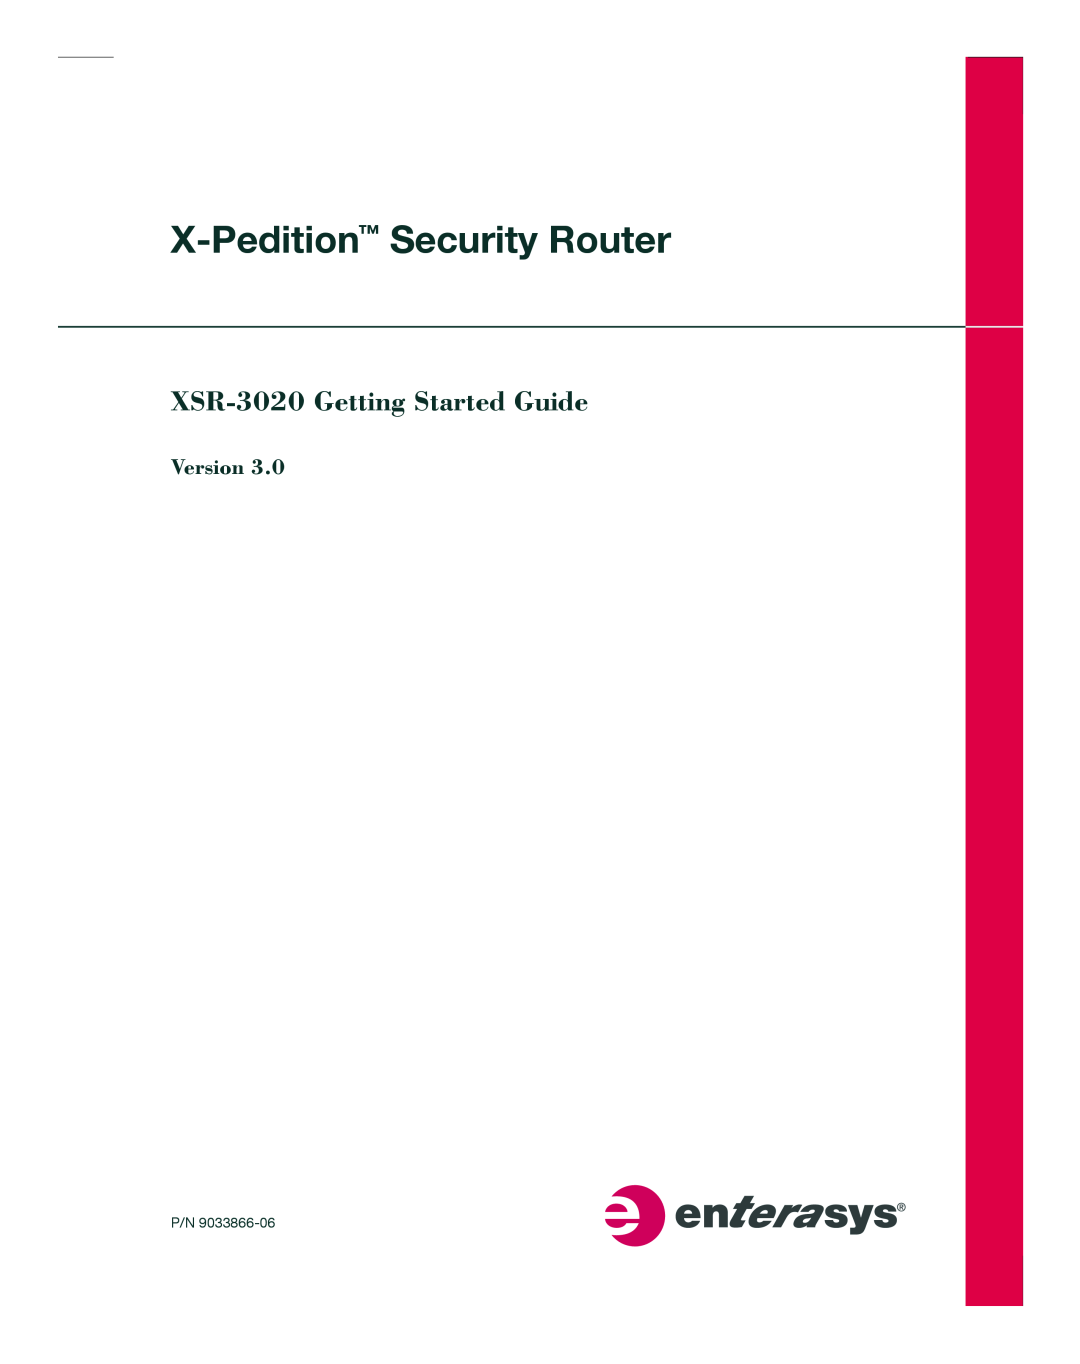 Enterasys Networks manual Version, X-Pedition Security Router, XSR-3020 Getting Started Guide 